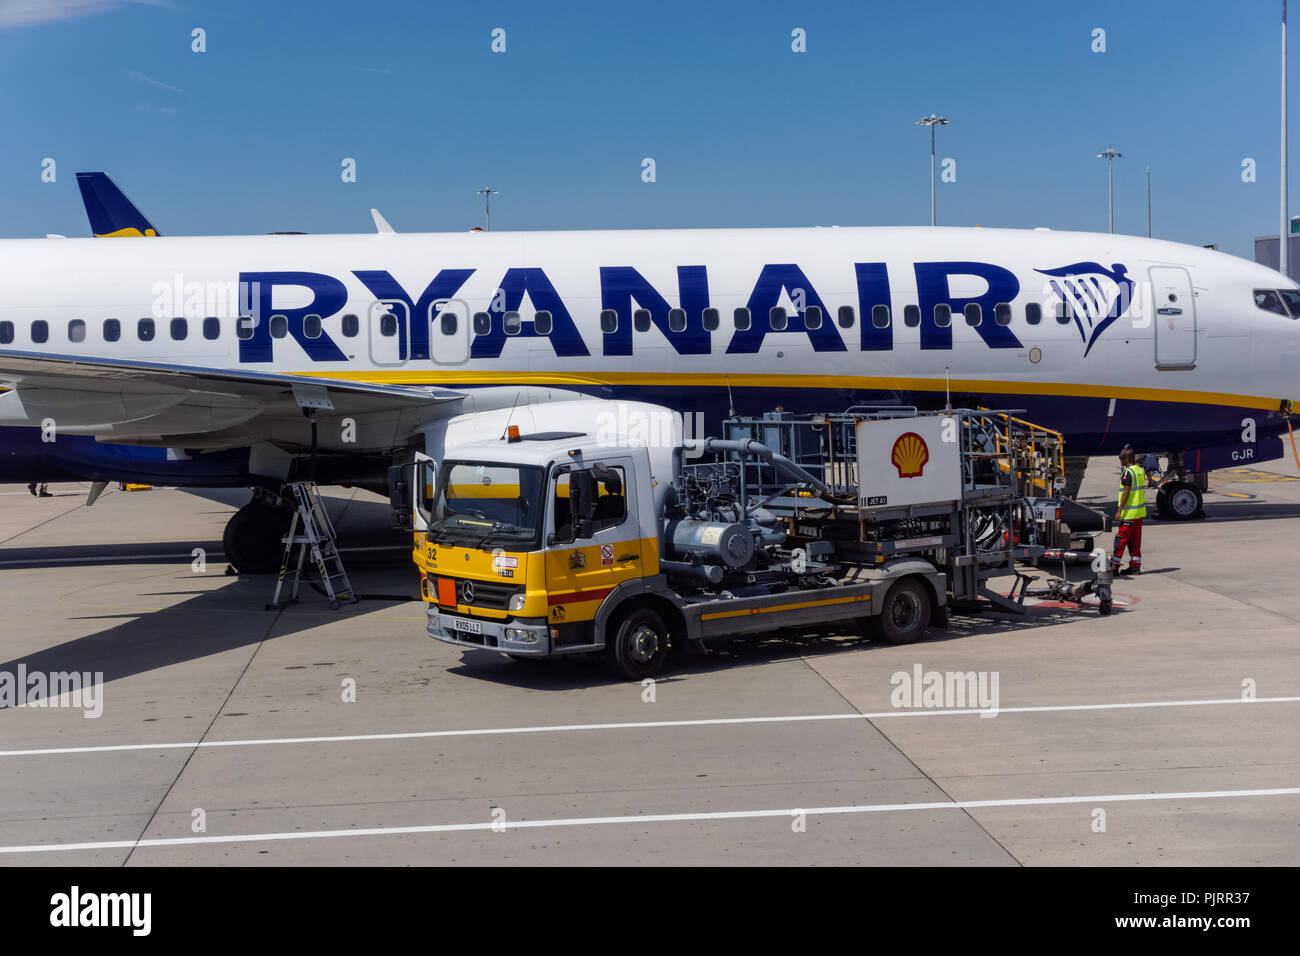 Ryanair plane refueling with Shell refueling truck at London Stansted Airport, England United Kingdom UK Stock Photo